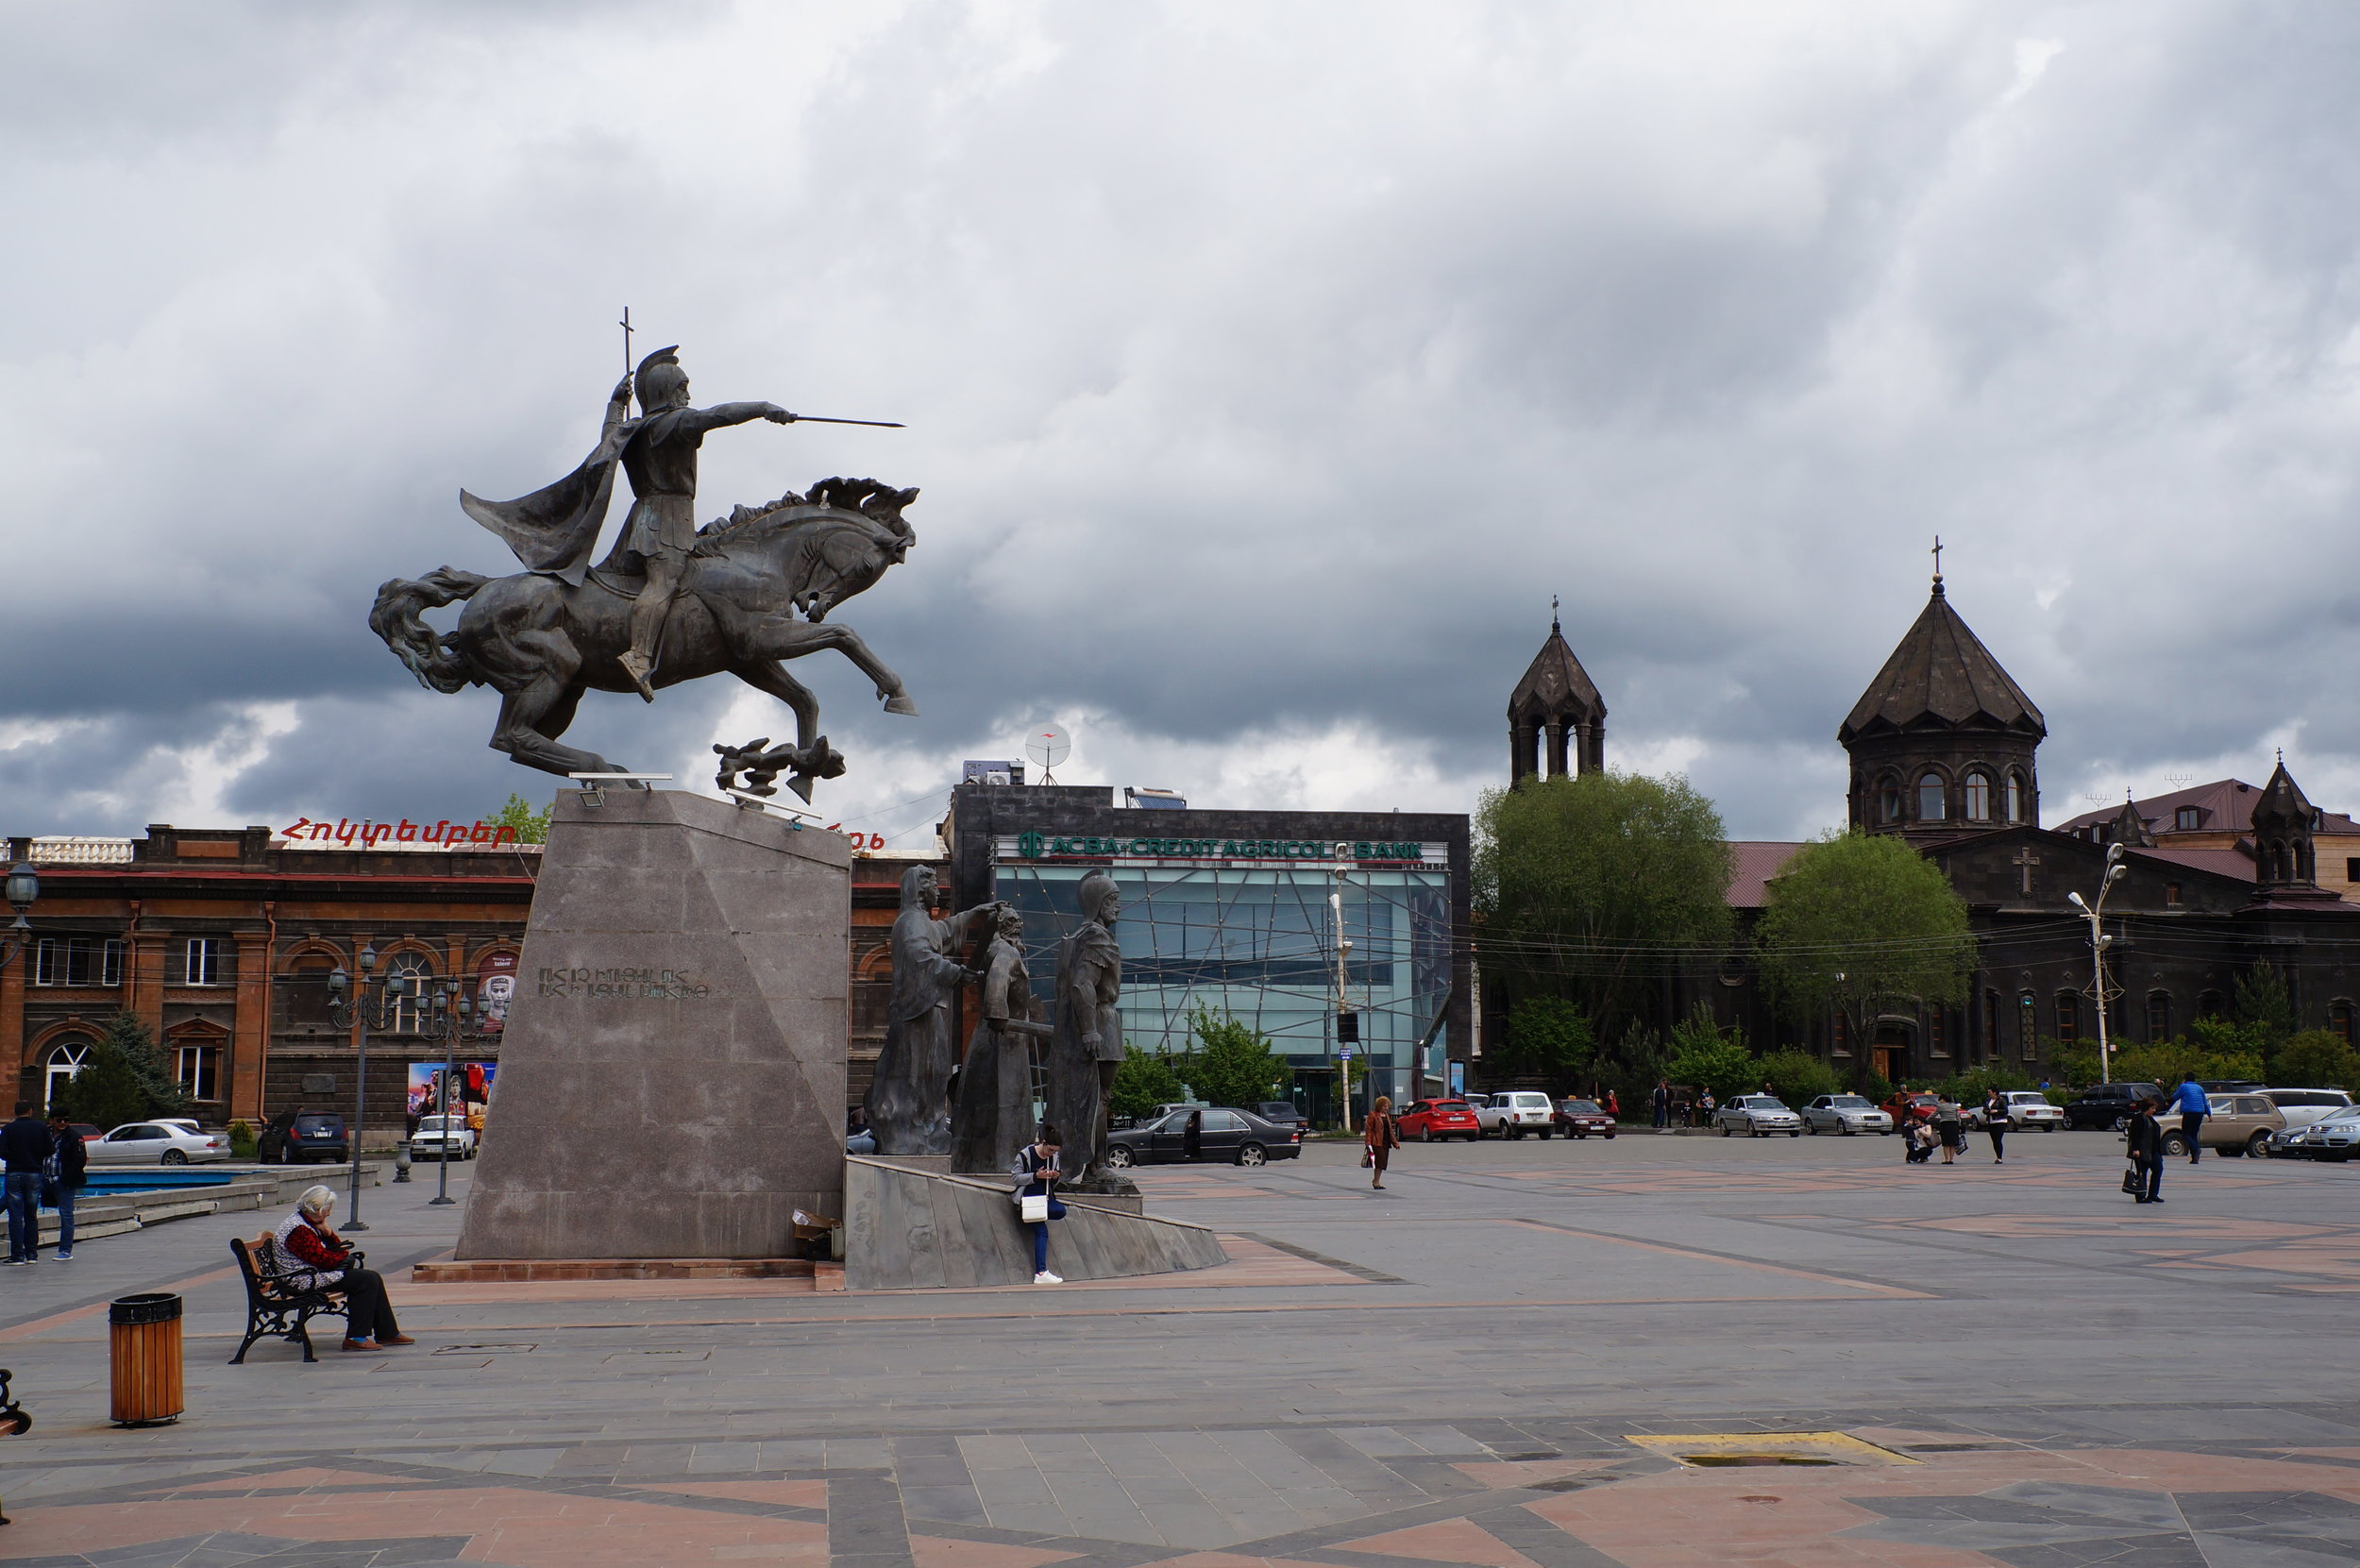 This statue features Vartan Mamikonian, a military leader in the Battle of Avarayr, in Gyumri's Vardanants Square.